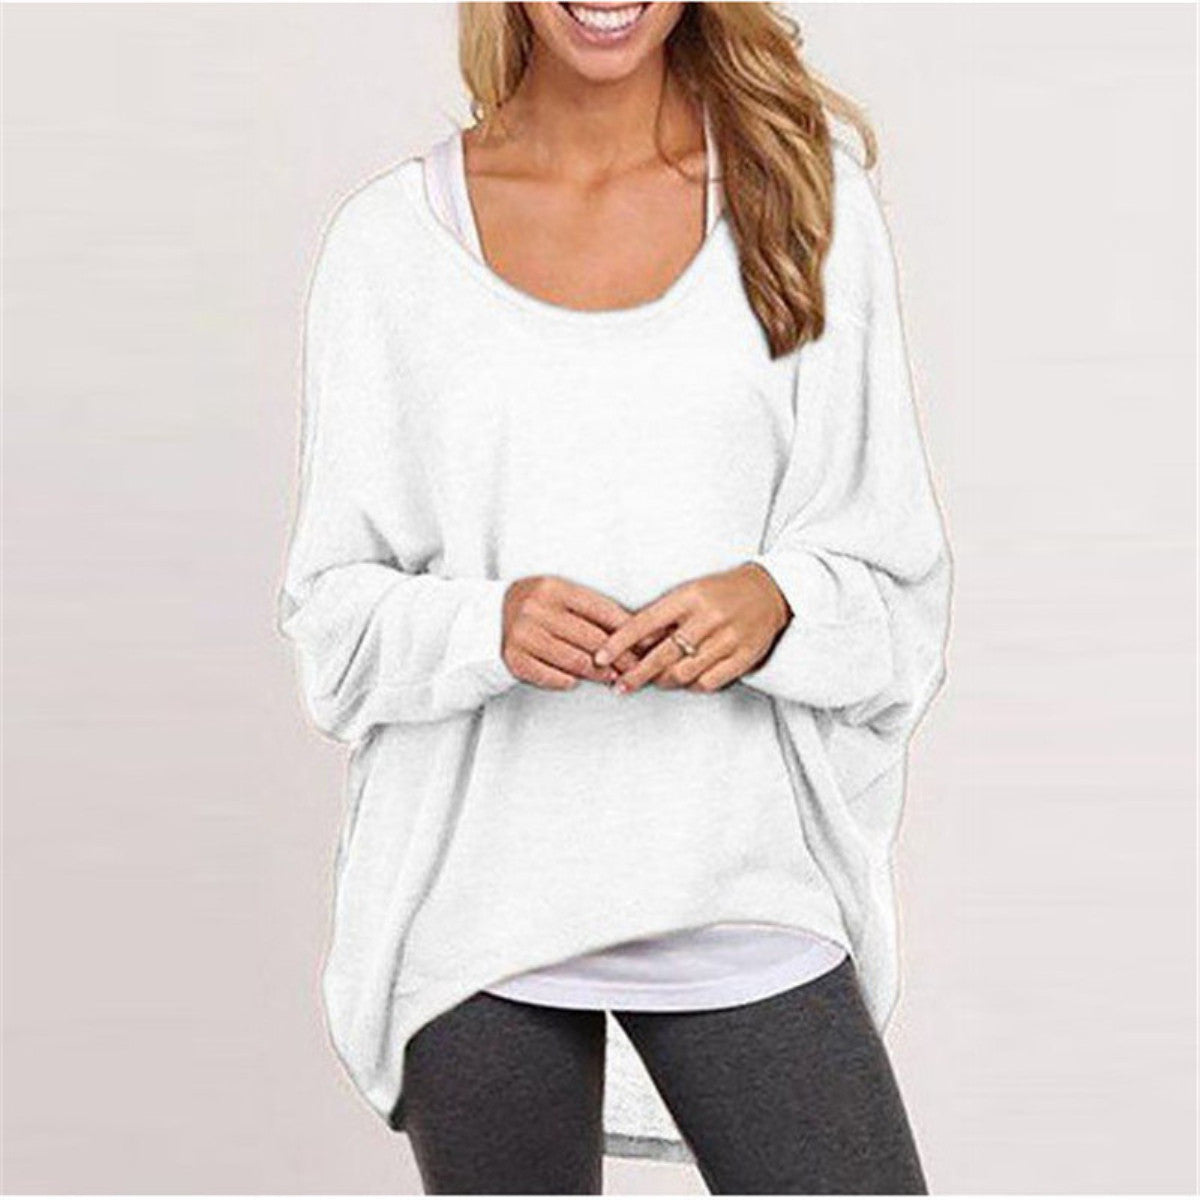 Women Sweater Jumper Pullover Batwing Long Sleeve Casual Loose Solid Blouse Shirt Top Plus-Dollar Bargains Online Shopping Australia